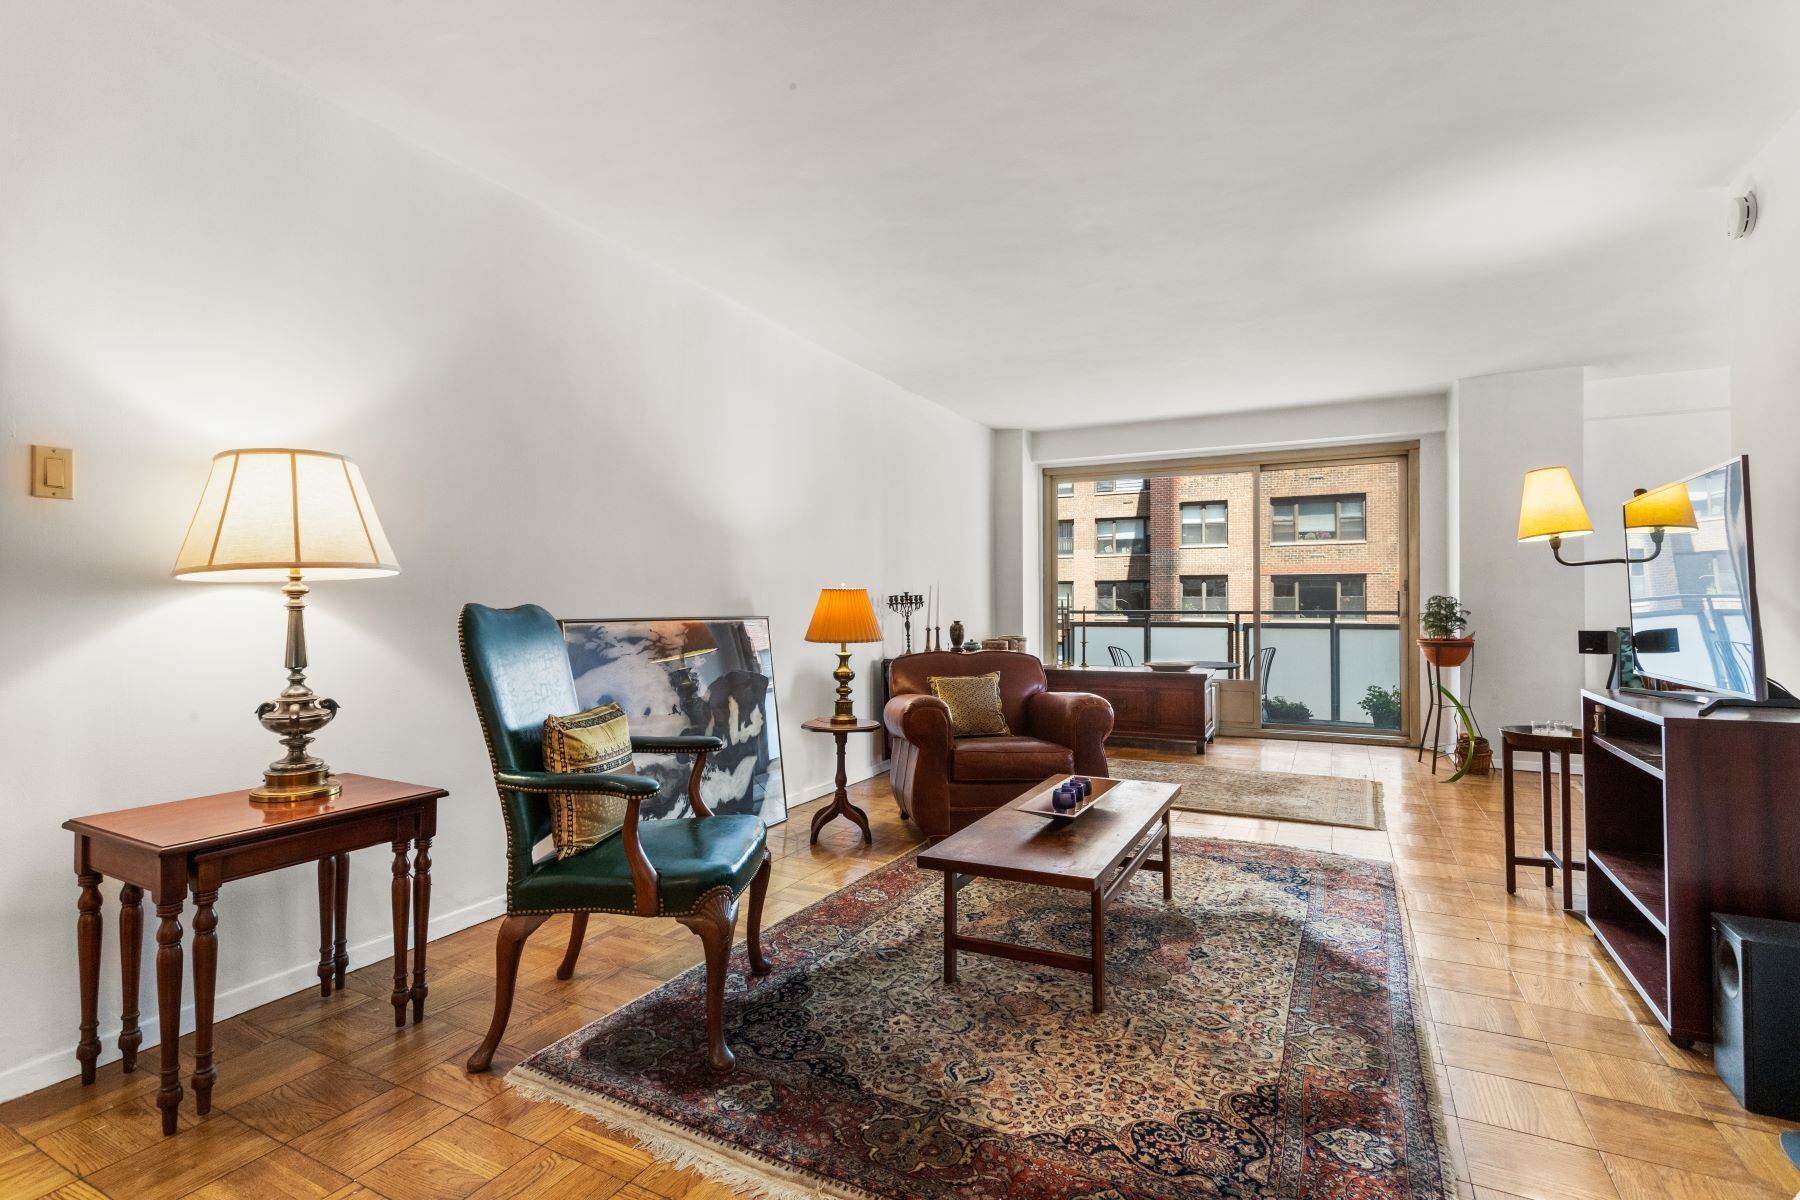 Apartments for Sale at 300 East 40th Street, Apt 7C 300 East 40th Street, 7C New York, New York 10016 United States